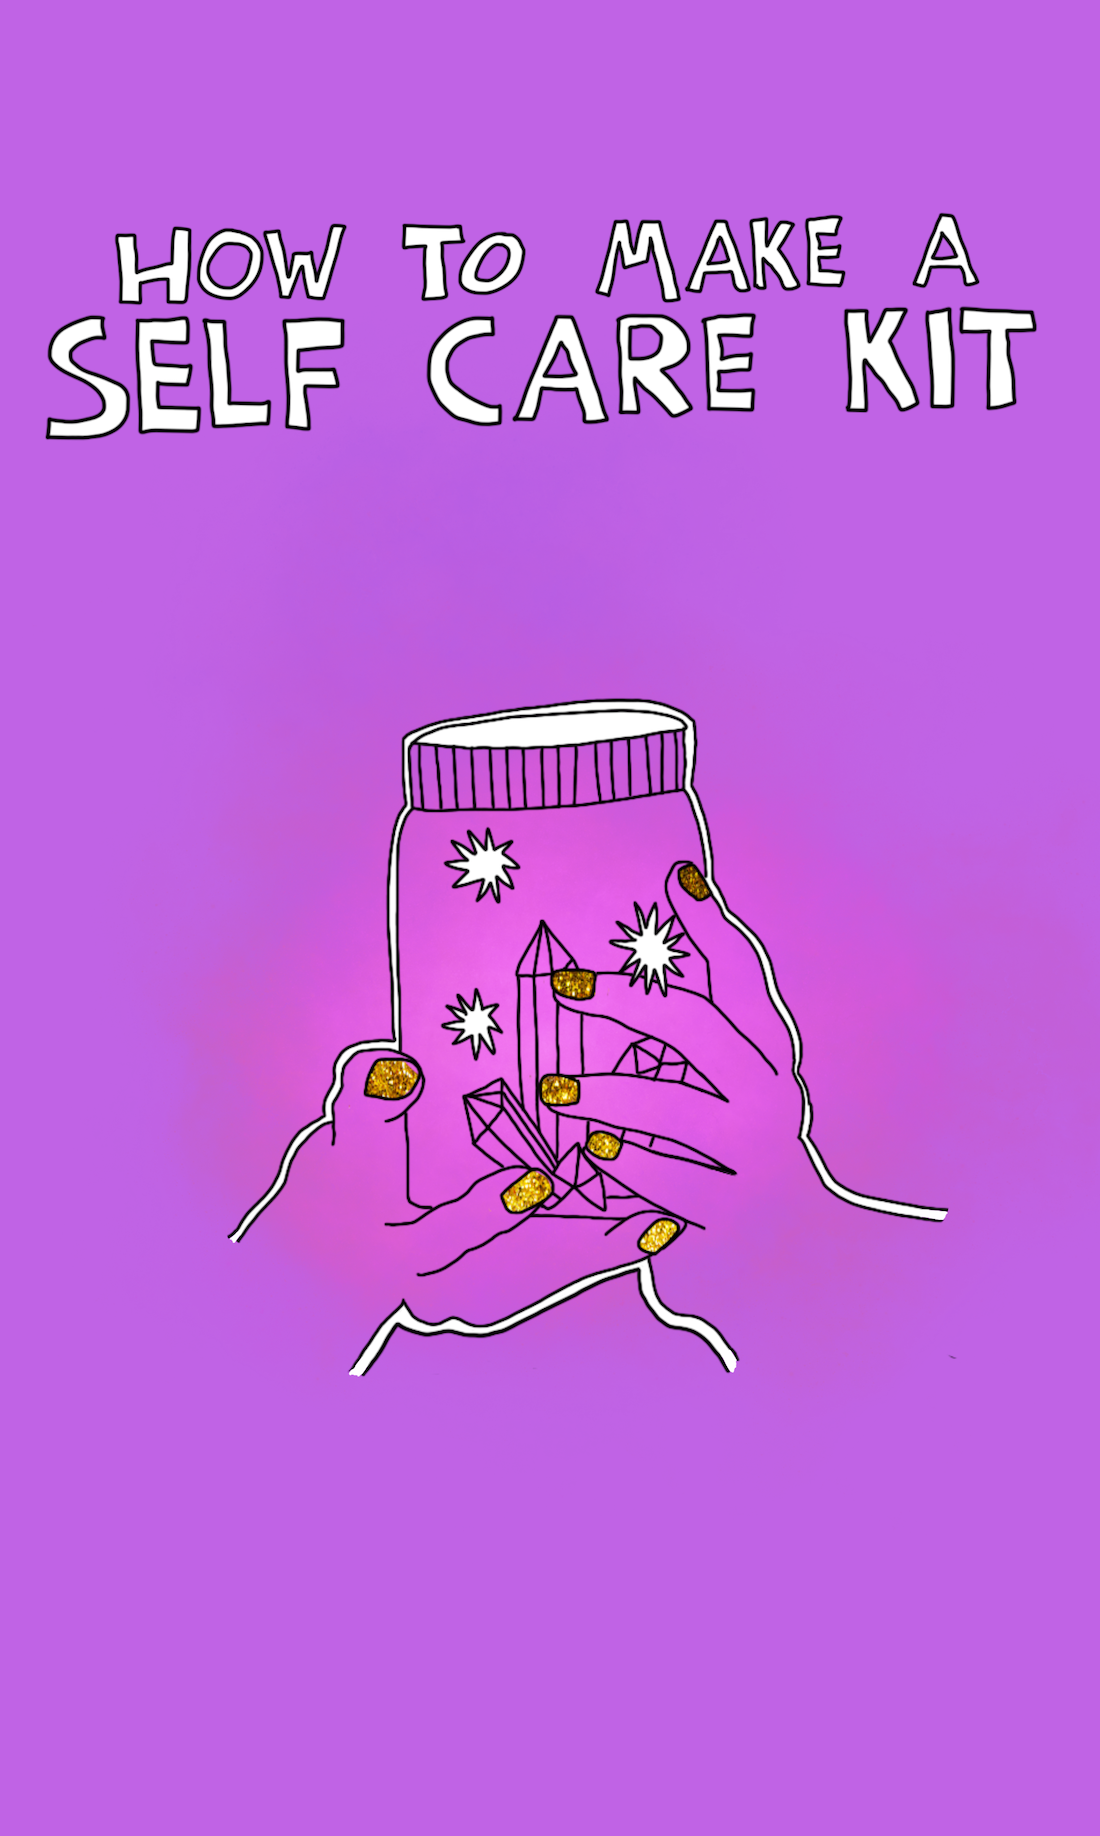 Creative Dream TV: Creating A Self-Care Kit For When You\'re In Crisis